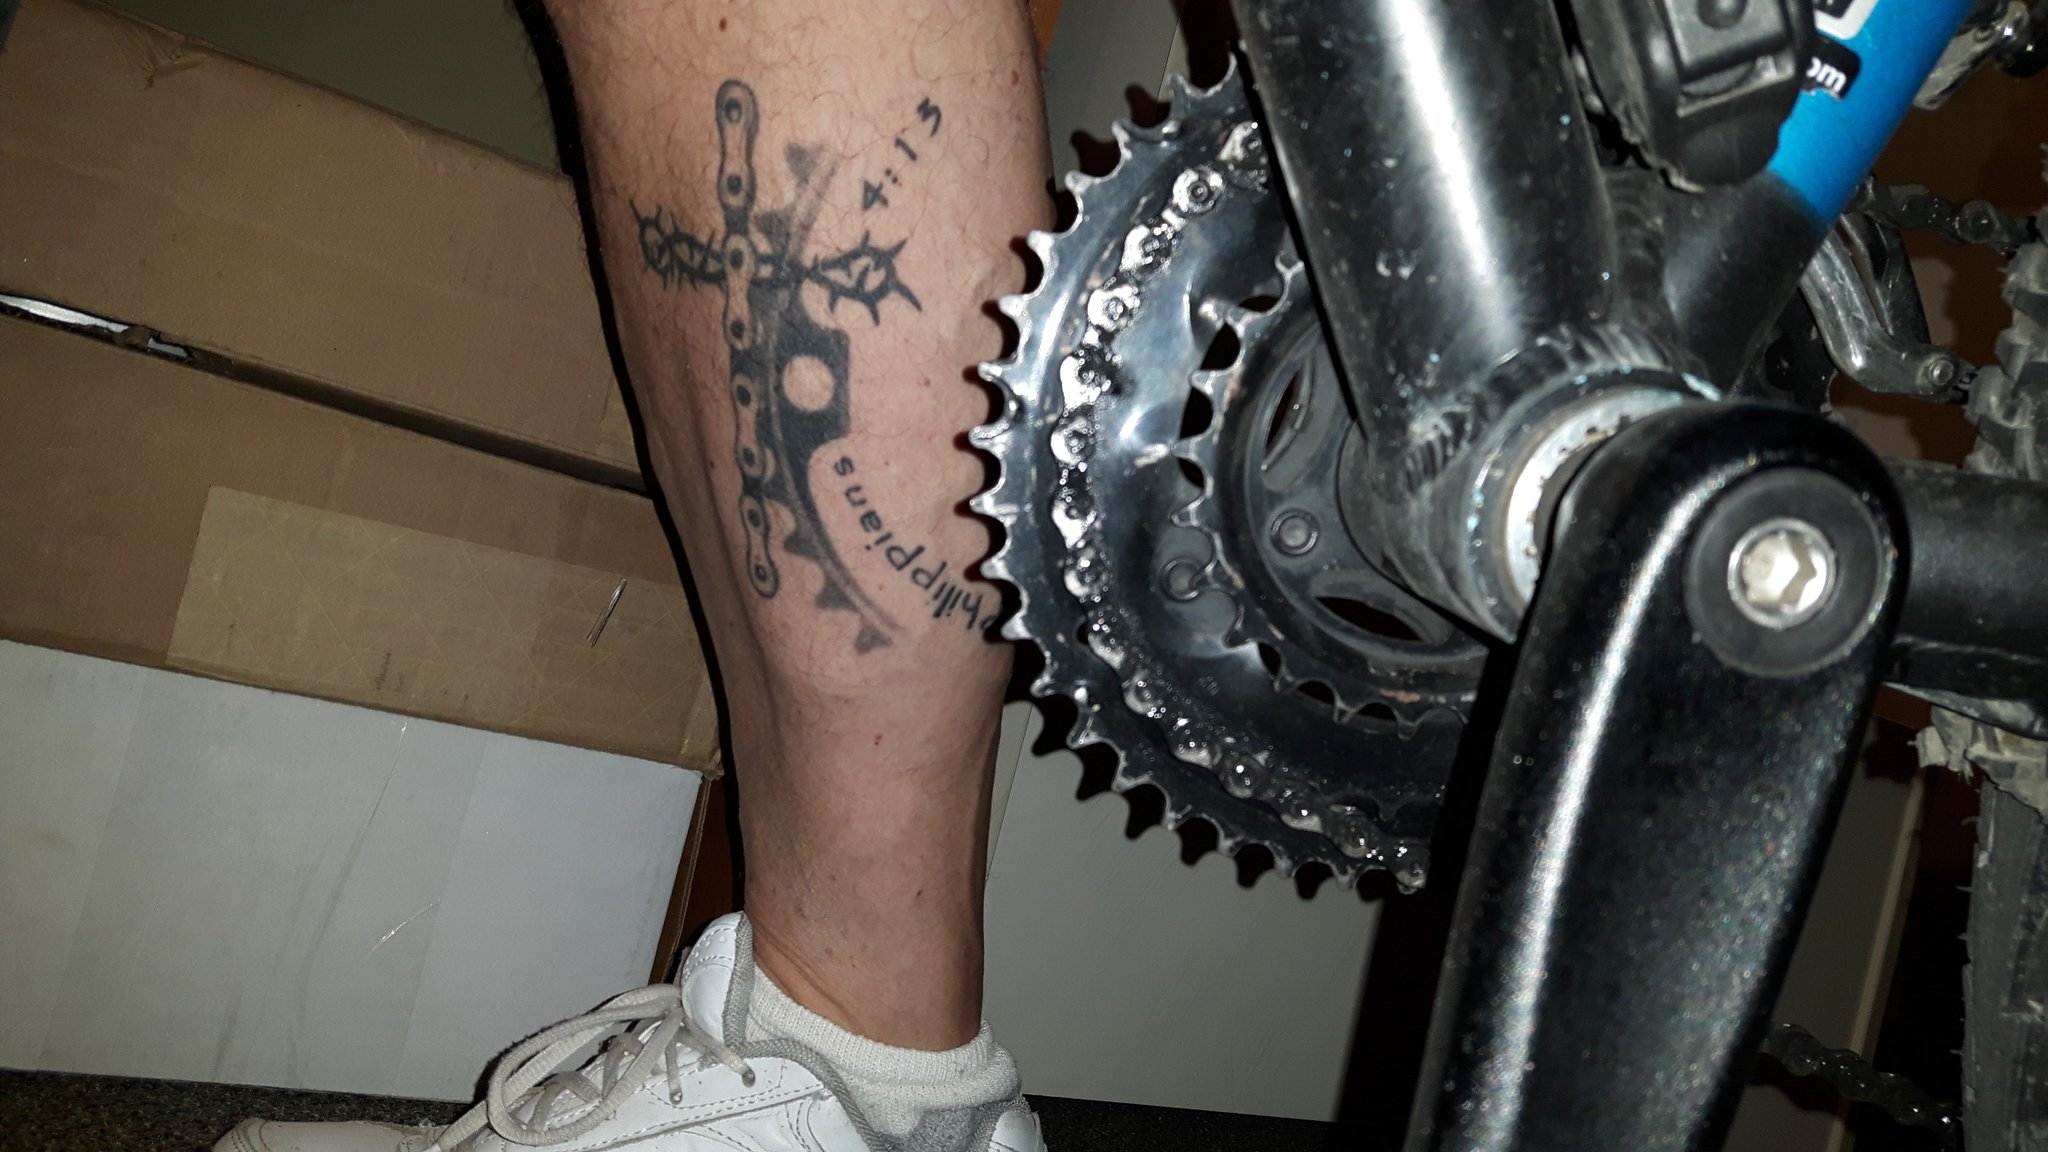 ❝Stephen Hayes❞ on X: "@digitalshawn Here's a tattoo I designed to resemble a grease mark from my bike. #ph413 #chainringtattoo #icandoallthingsthroughchrist https://t.co/Sc8zhBp3hJ" / X